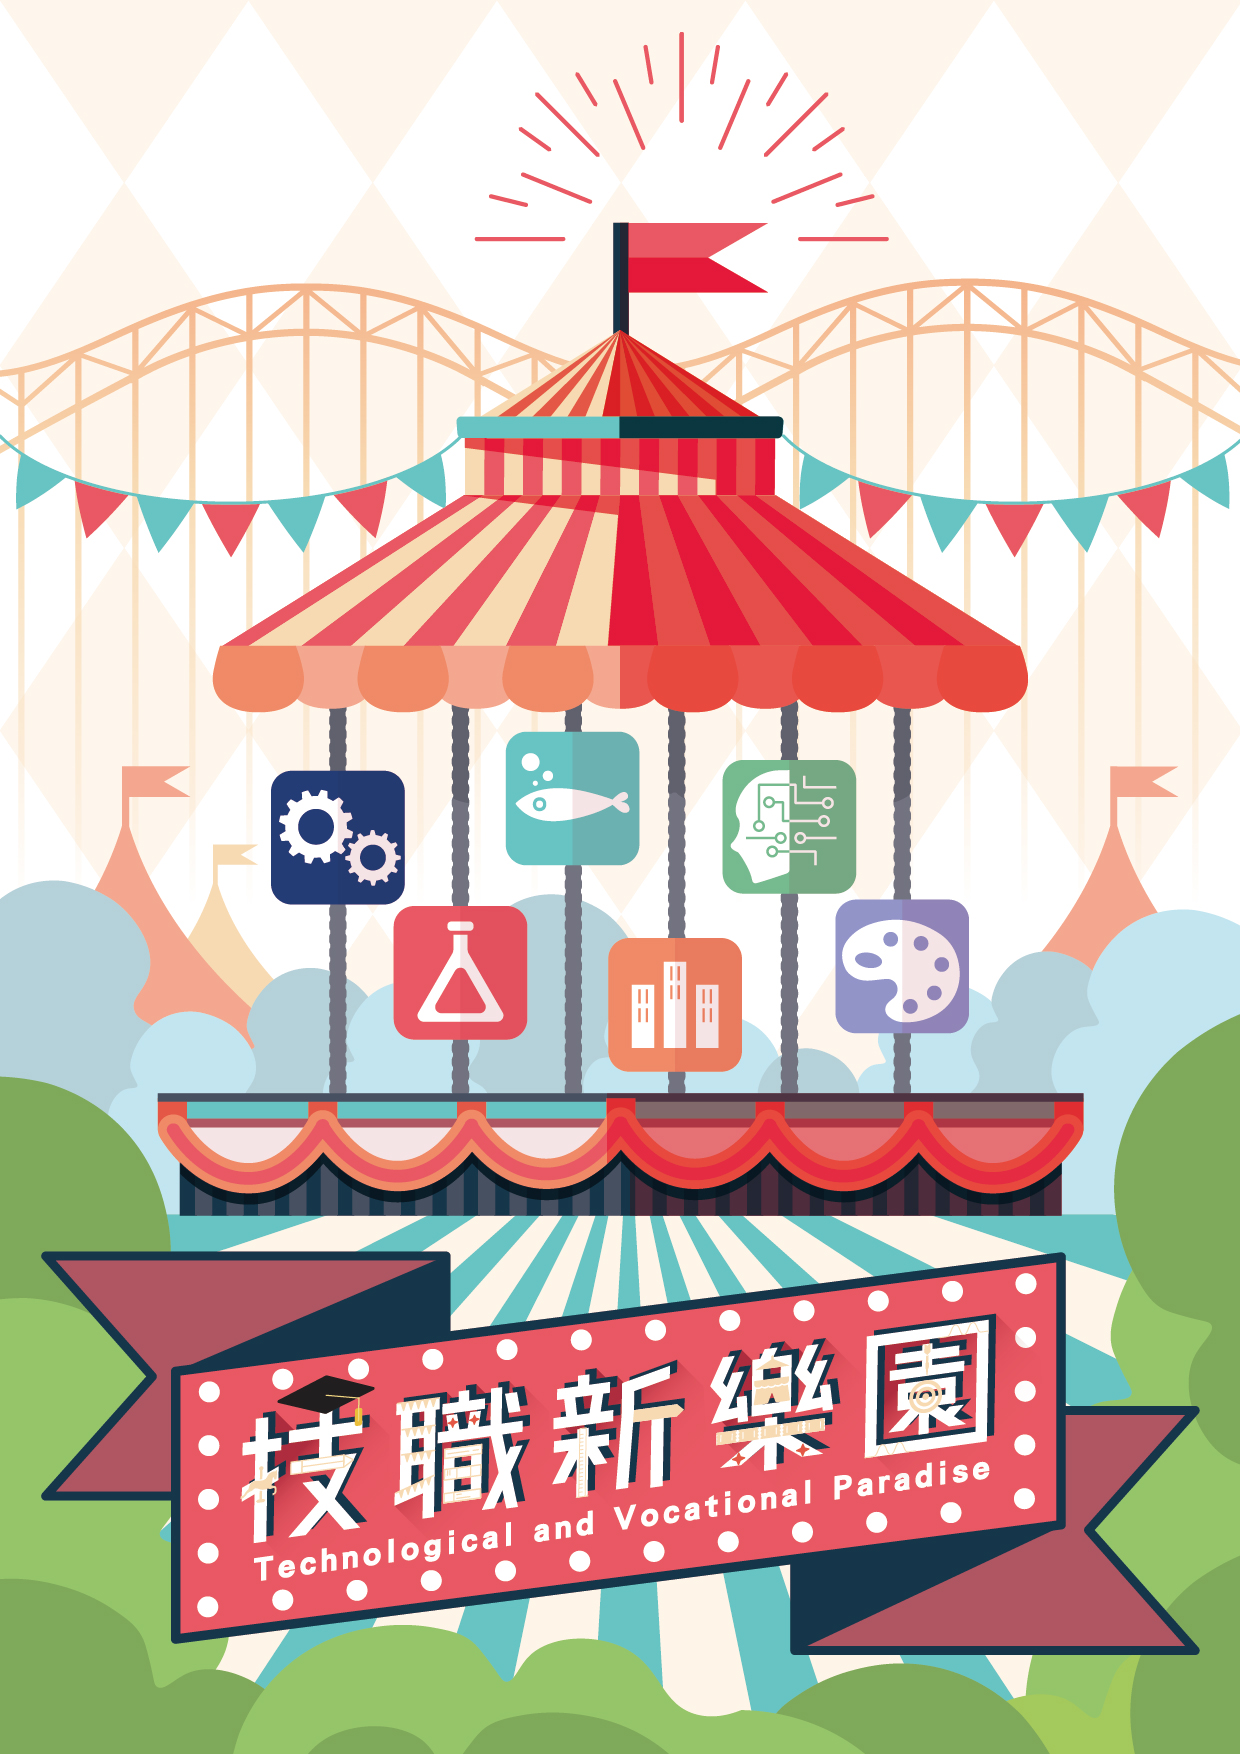 Now is the future, exploring the Technological and Vocational Paradise(我的未來在這裡~技職新樂園)